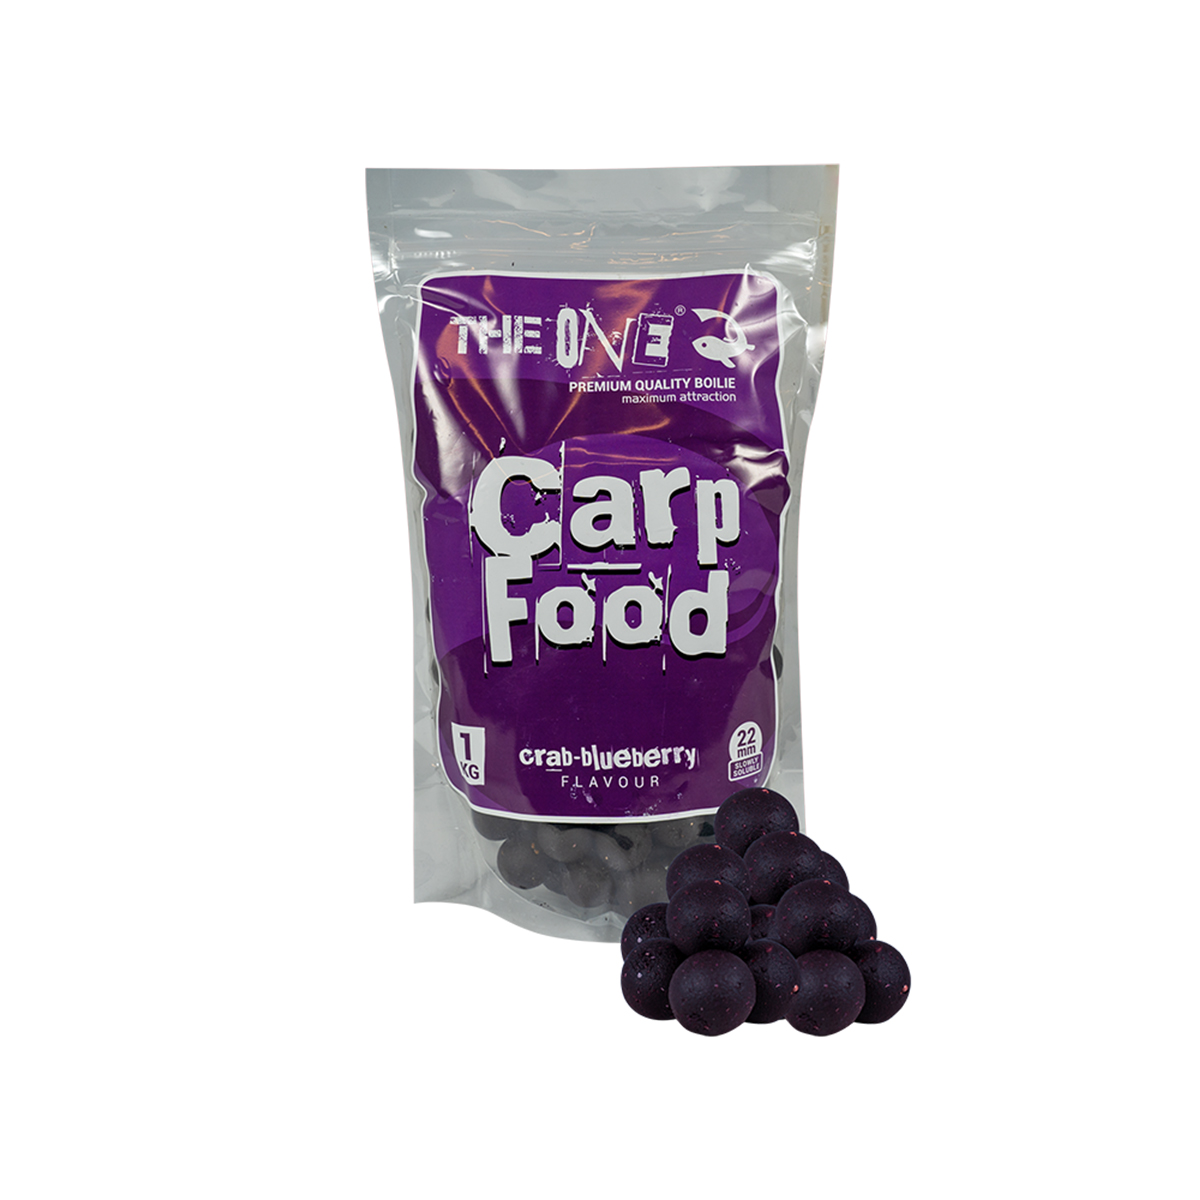 BOILIES THE ONE FOOD PURPLE SOLUBILE 22MM 1KG - 98037522